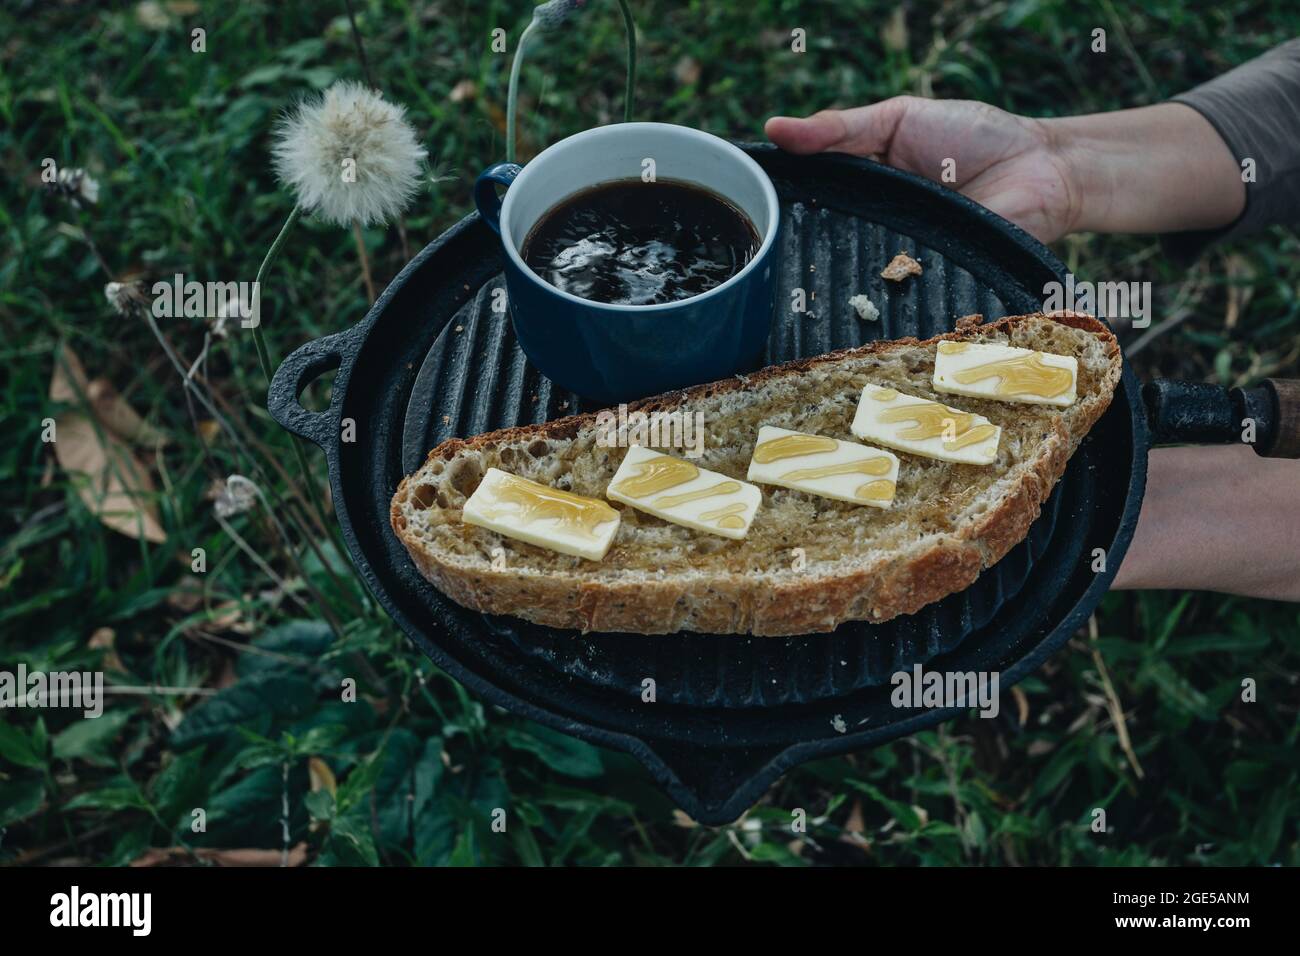 Homemade crusty open crumb artisan sourdough bread with butter and honey, cup of coffee, in the backyard, natural background Stock Photo